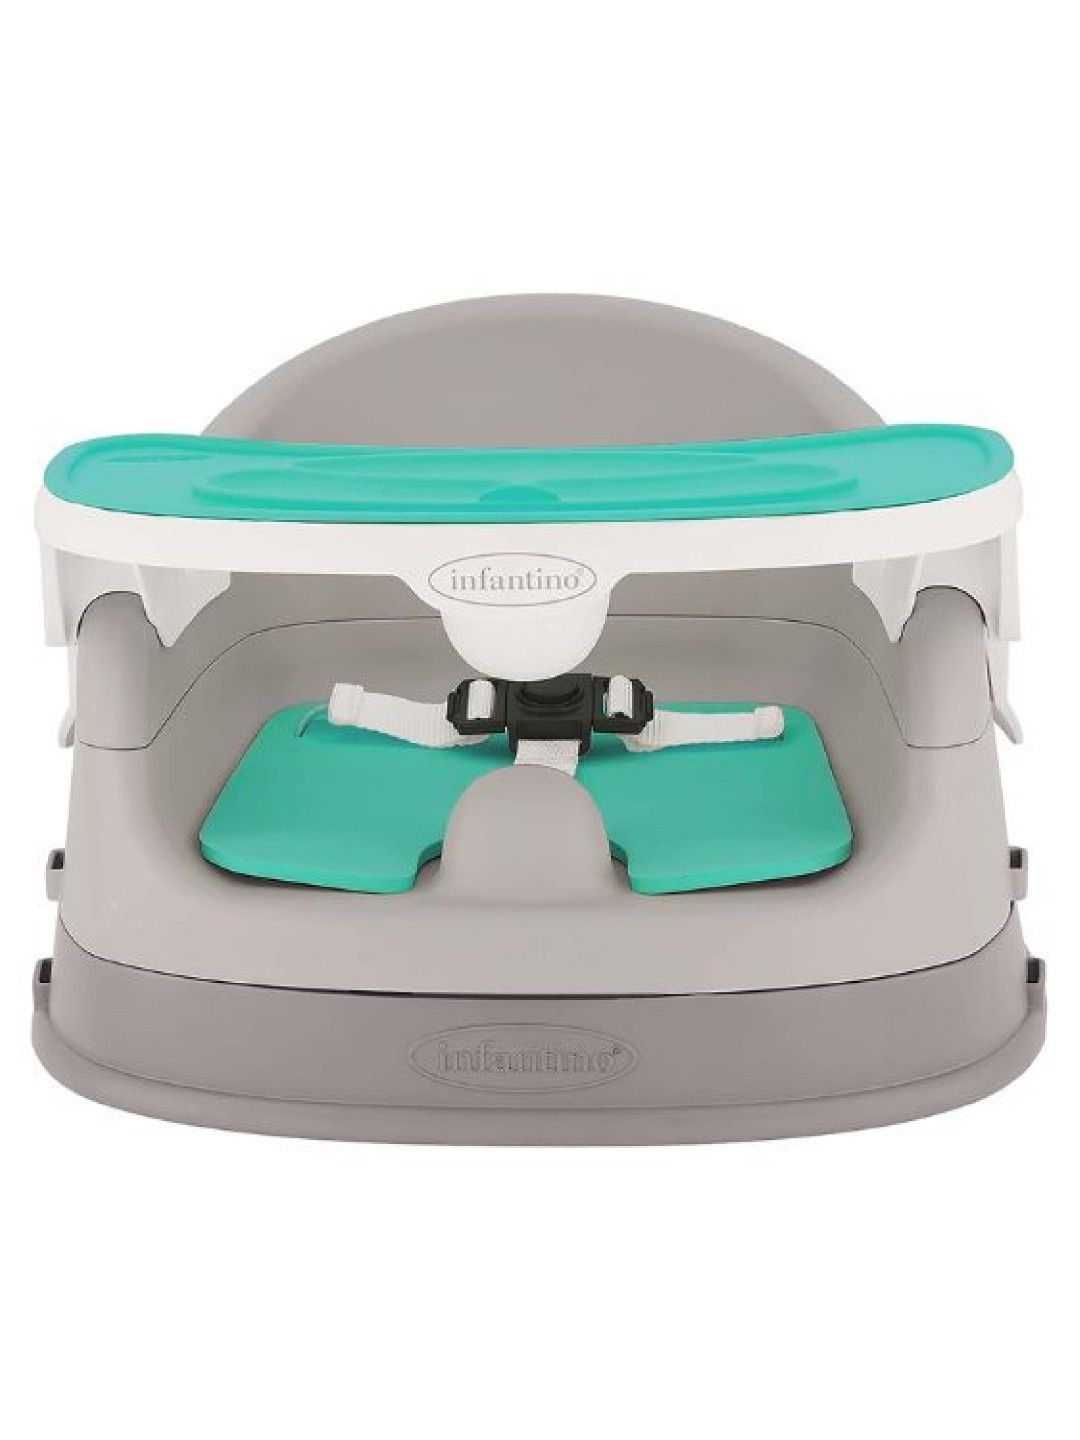 Infantino Grow with me 4-in-1 Two-Can-Dine Deluxe Feeding Booster Seat (No Color- Image 1)